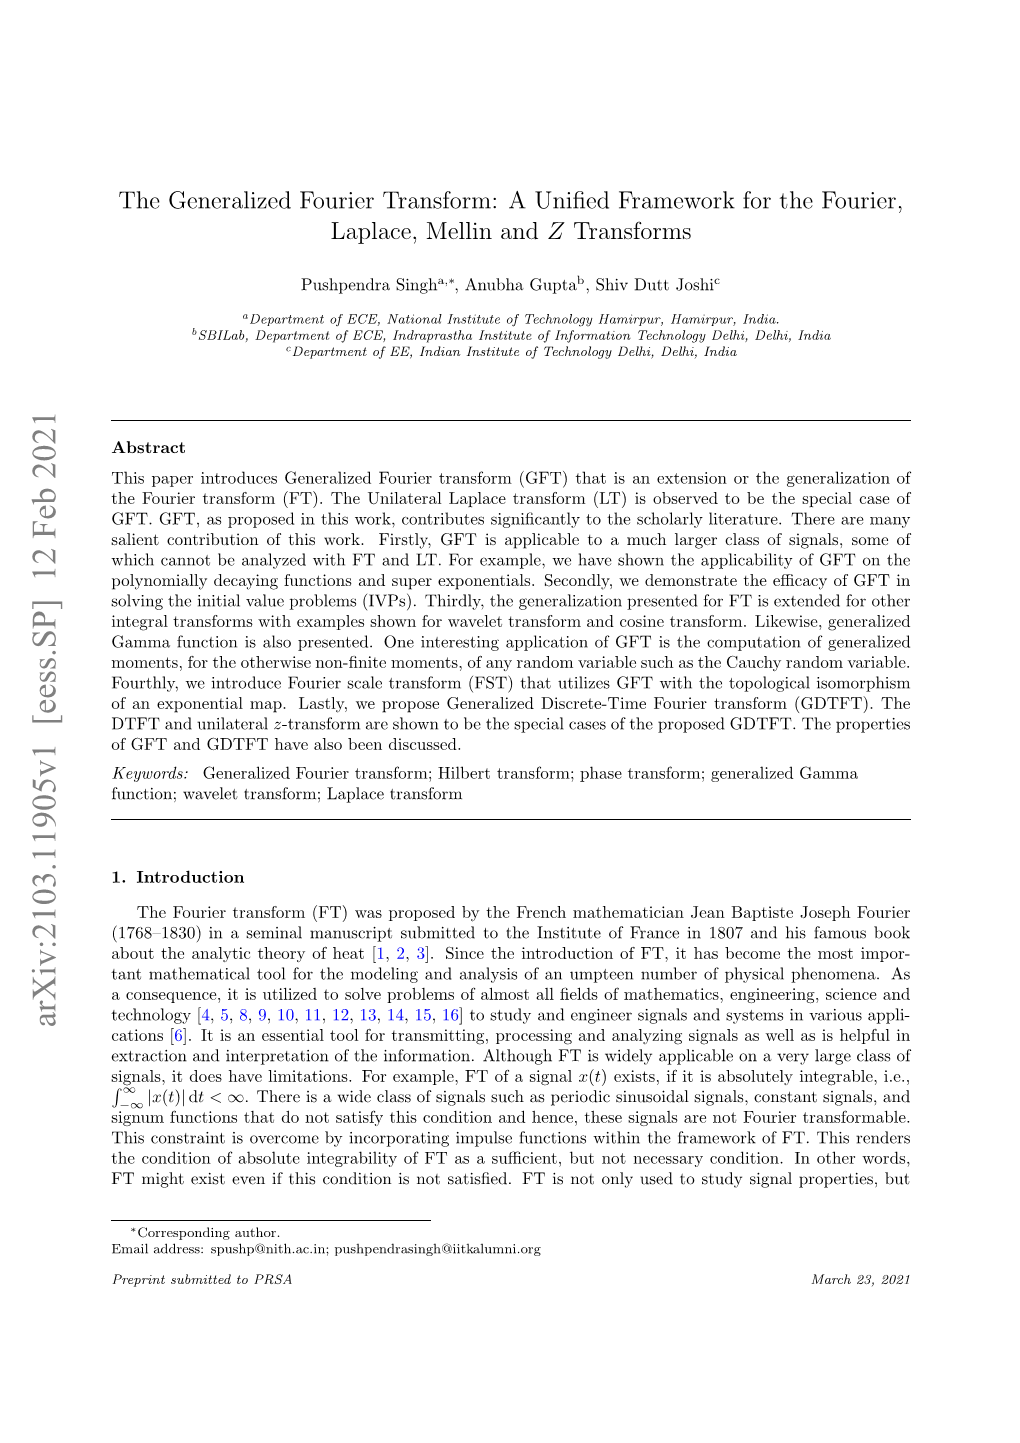 A Unified Framework for the Fourier, Laplace, Mellin and Z Transforms